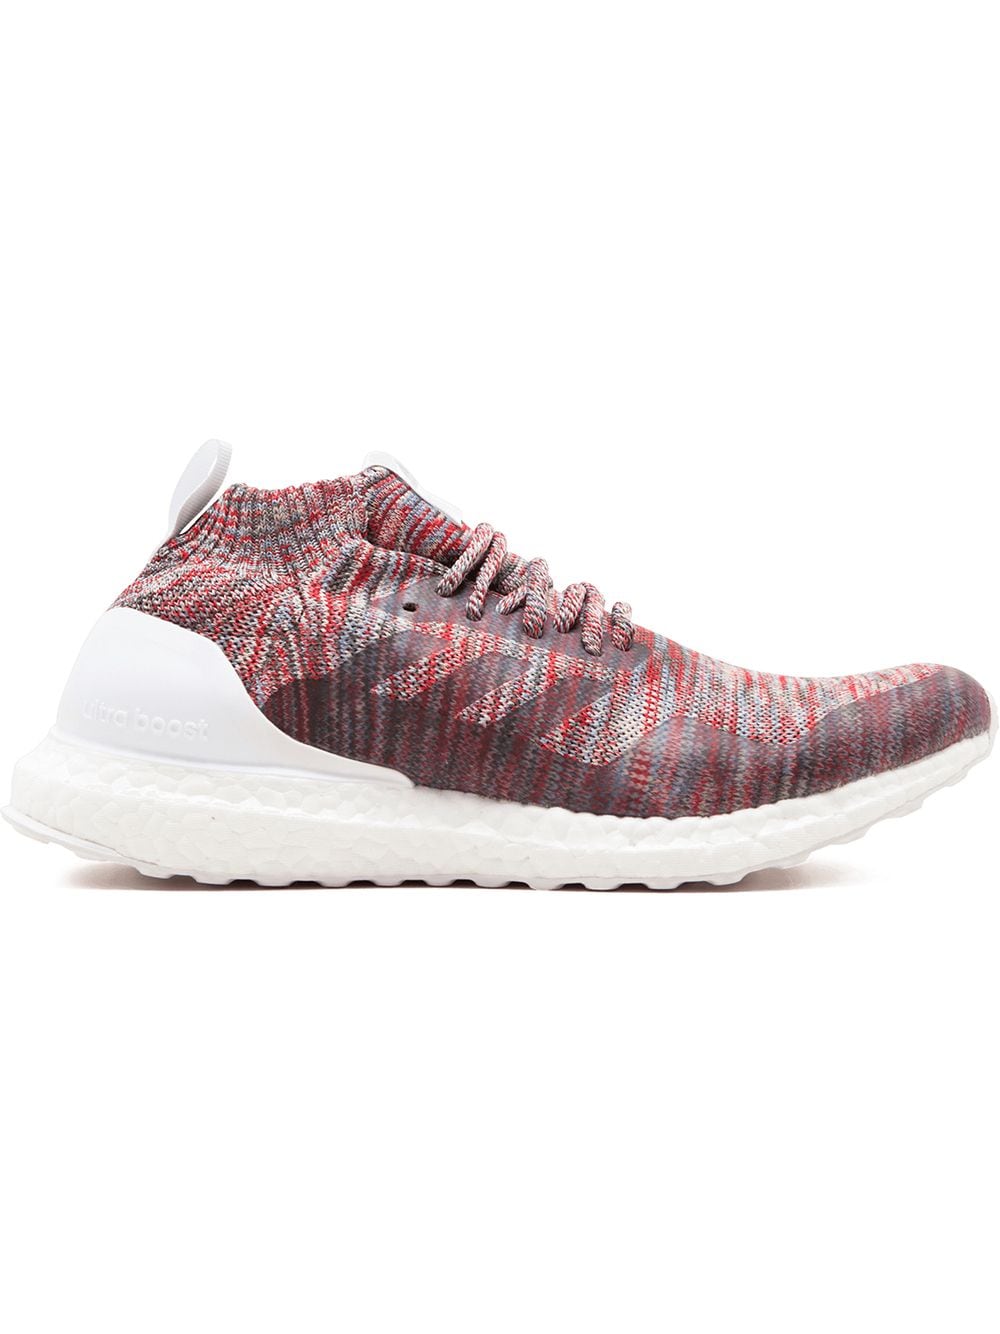 adidas x Kith Ultraboost Mid "Aspen" sneakers - Red von adidas